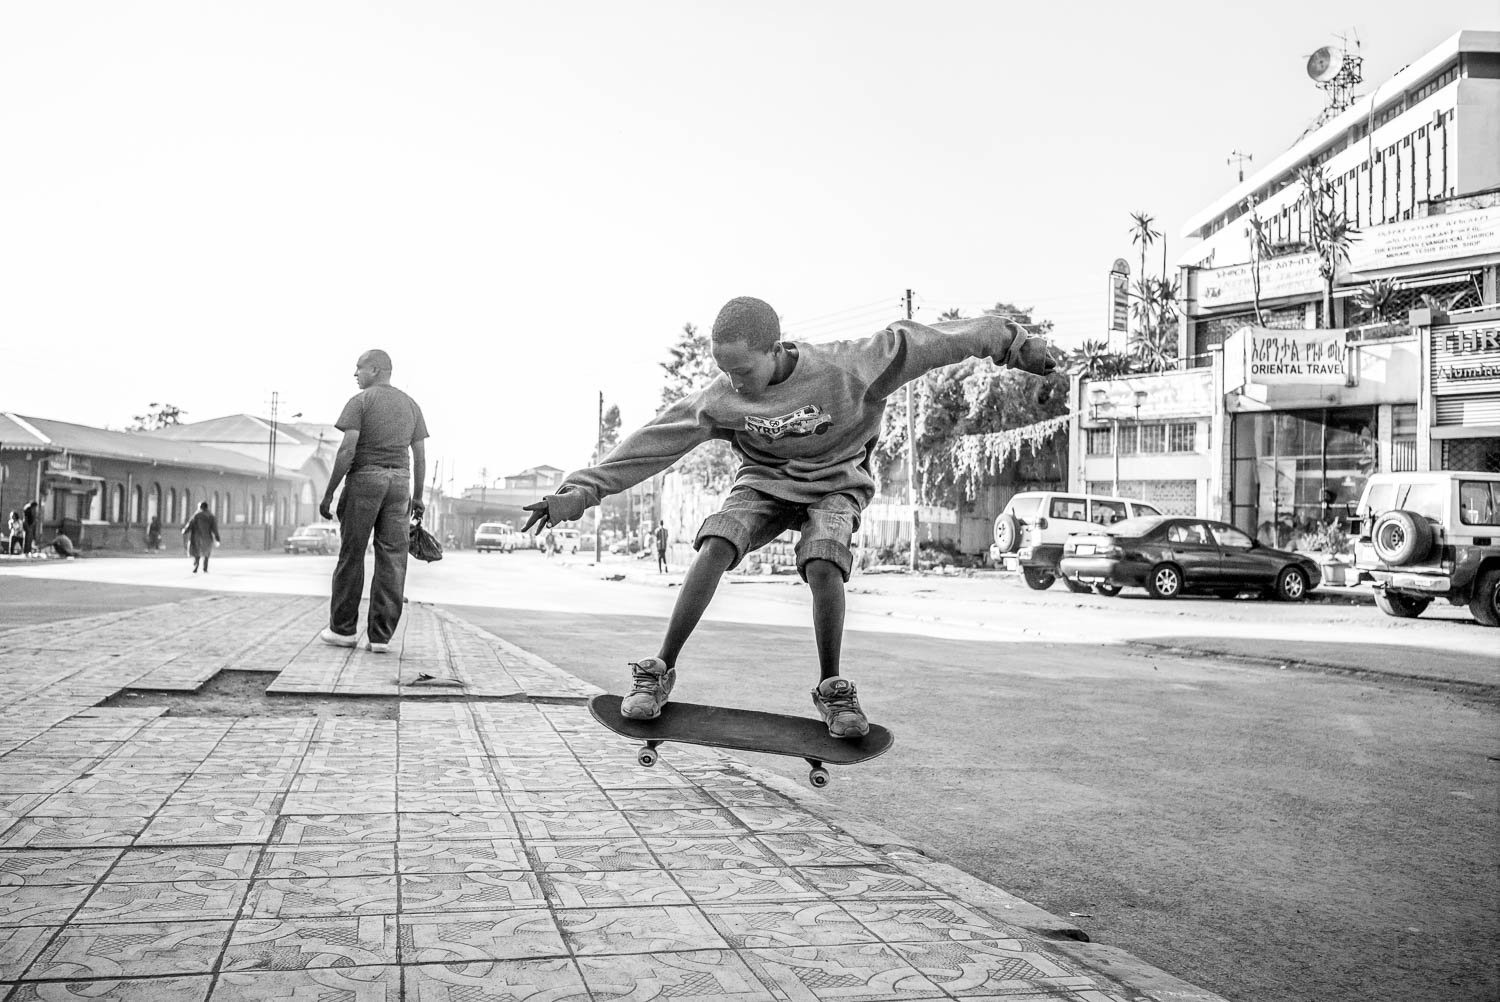 One for the diary Ethiopia Skate - photography by Daniel Reiter at Rich Mix foto